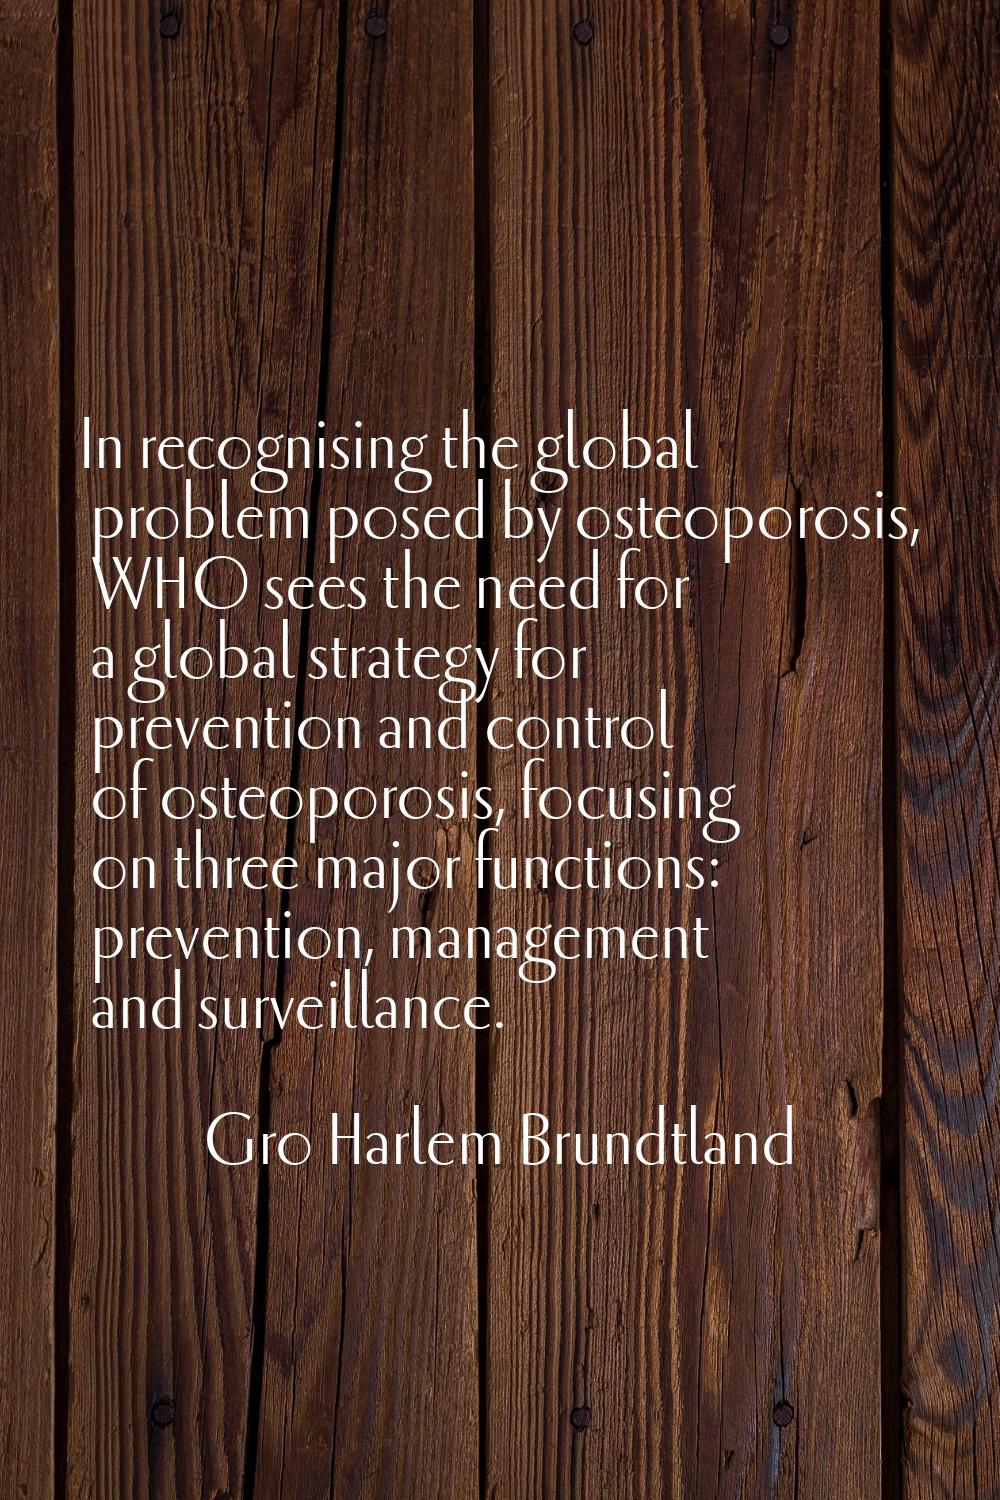 In recognising the global problem posed by osteoporosis, WHO sees the need for a global strategy fo